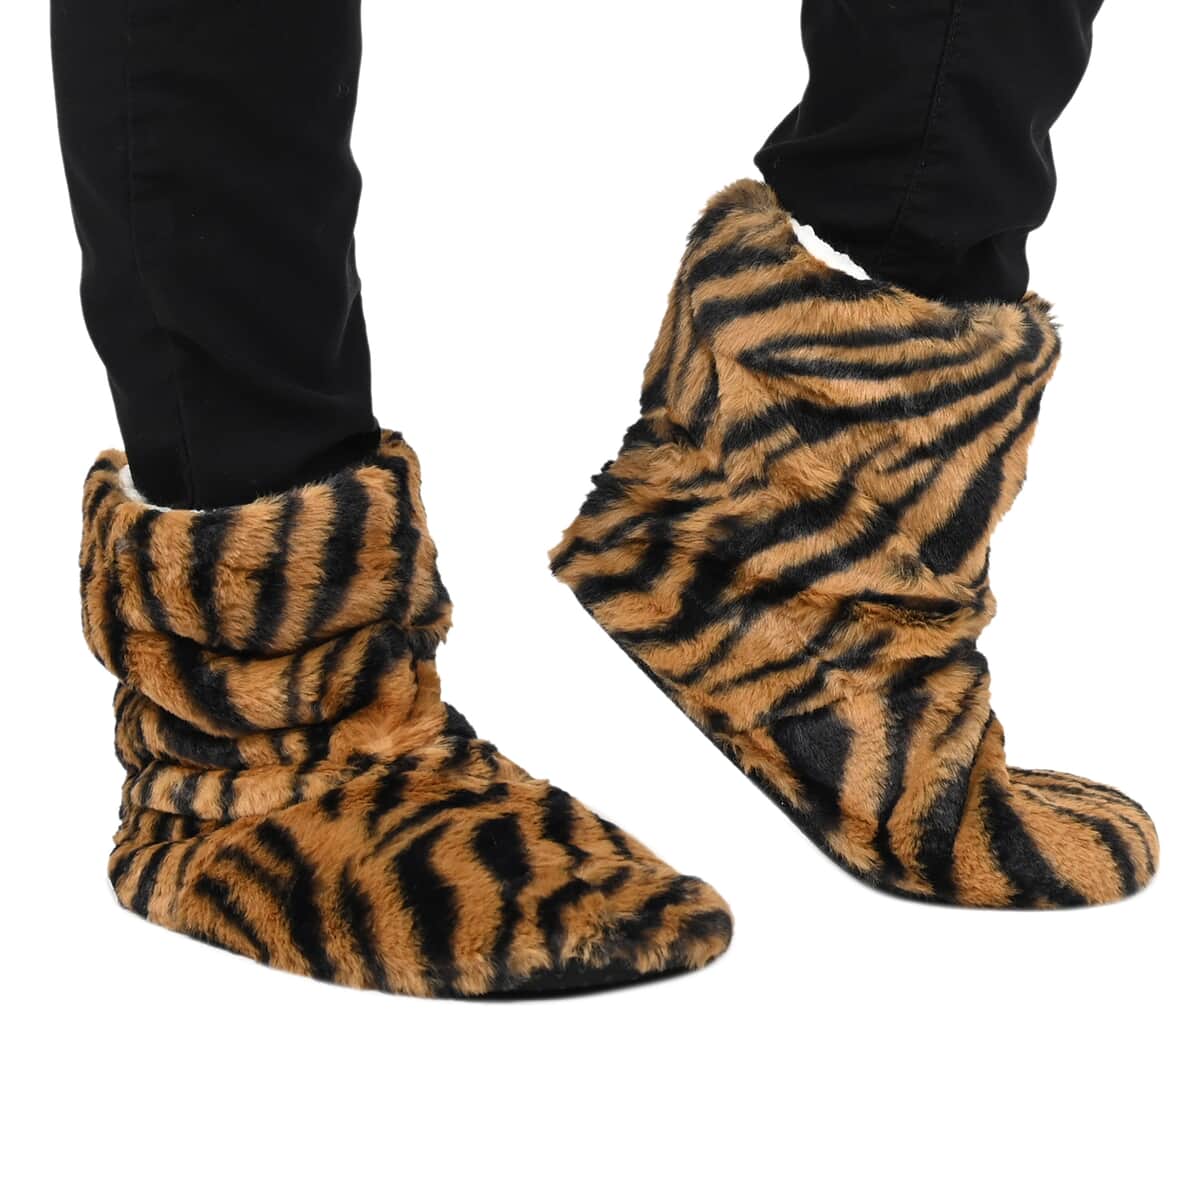 HOMESMART Tiger Print Faux Fur Sherpa Bootie Set of 2 Slippers (Women's Size 5-10) image number 2